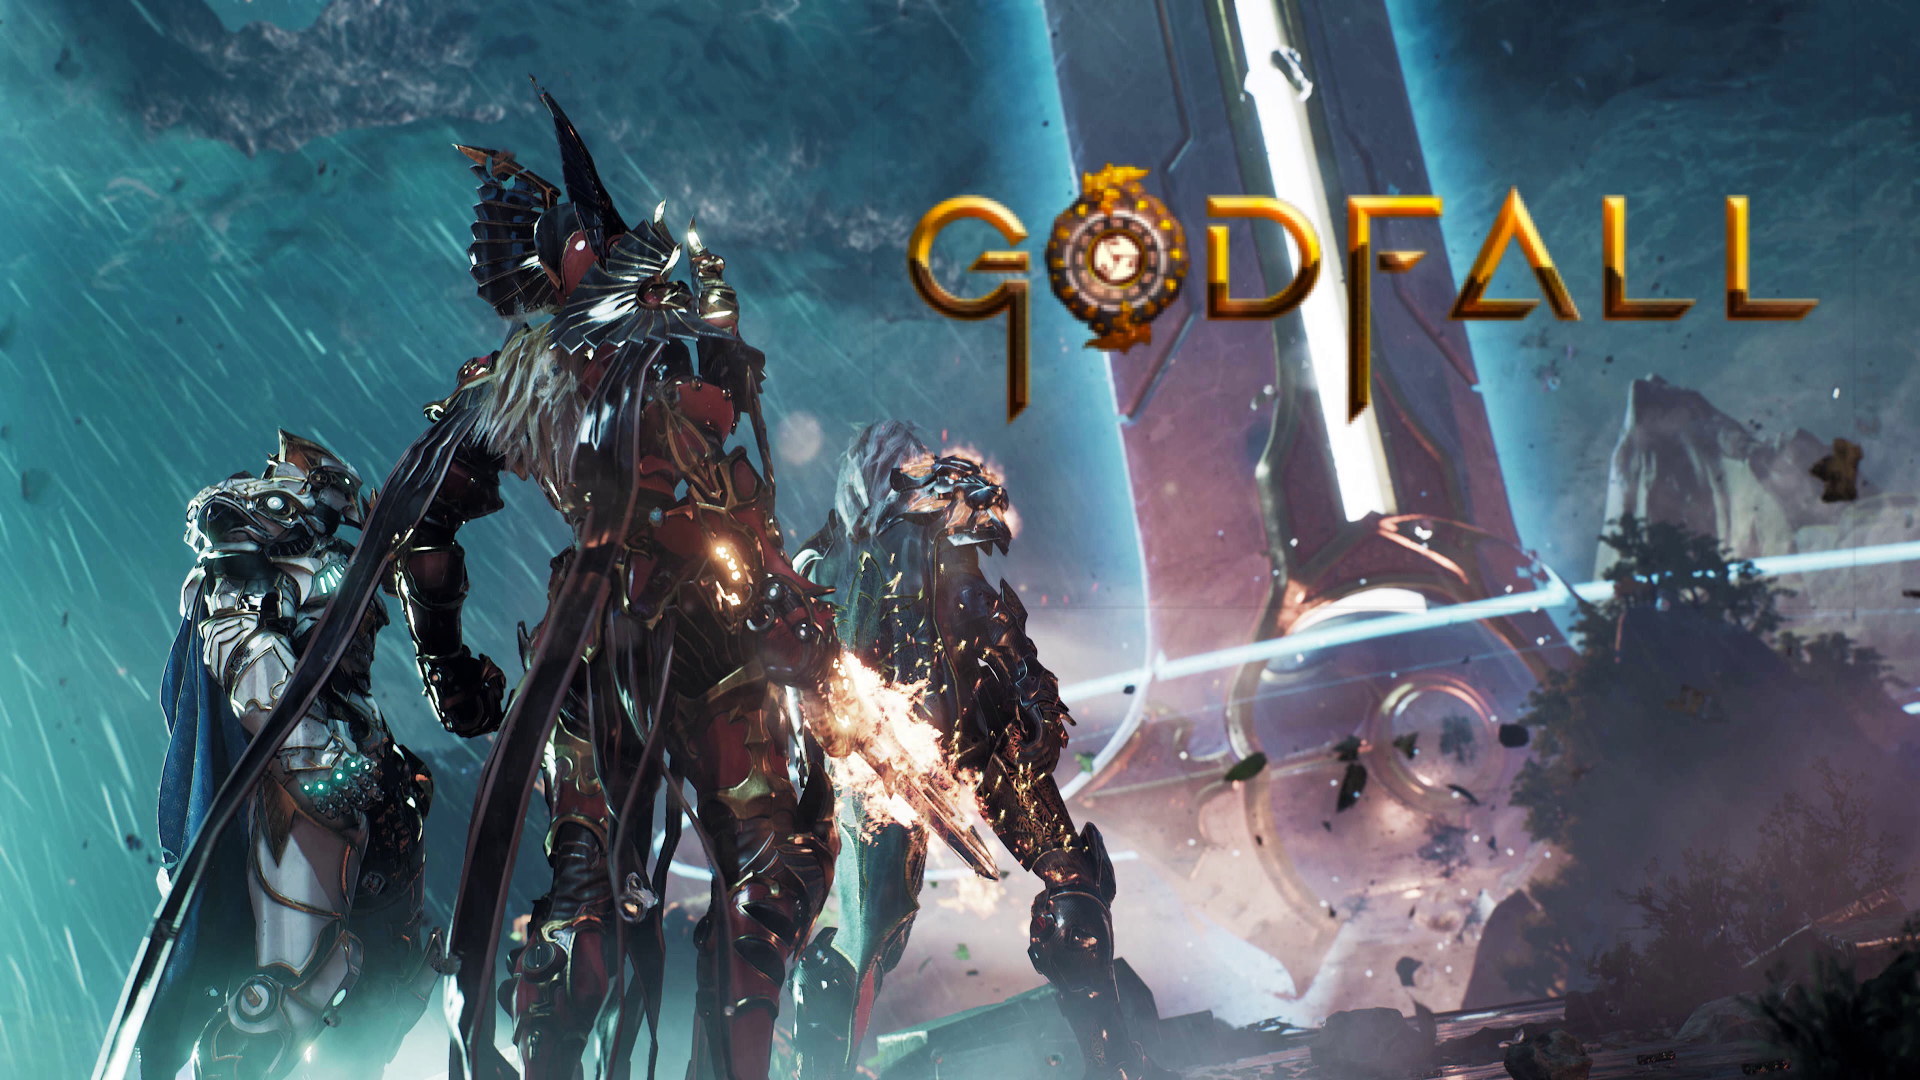 Godfall Is a PS5 Exclusive Because of Its “Exceptionally Powerful SSD” And Improved Controller